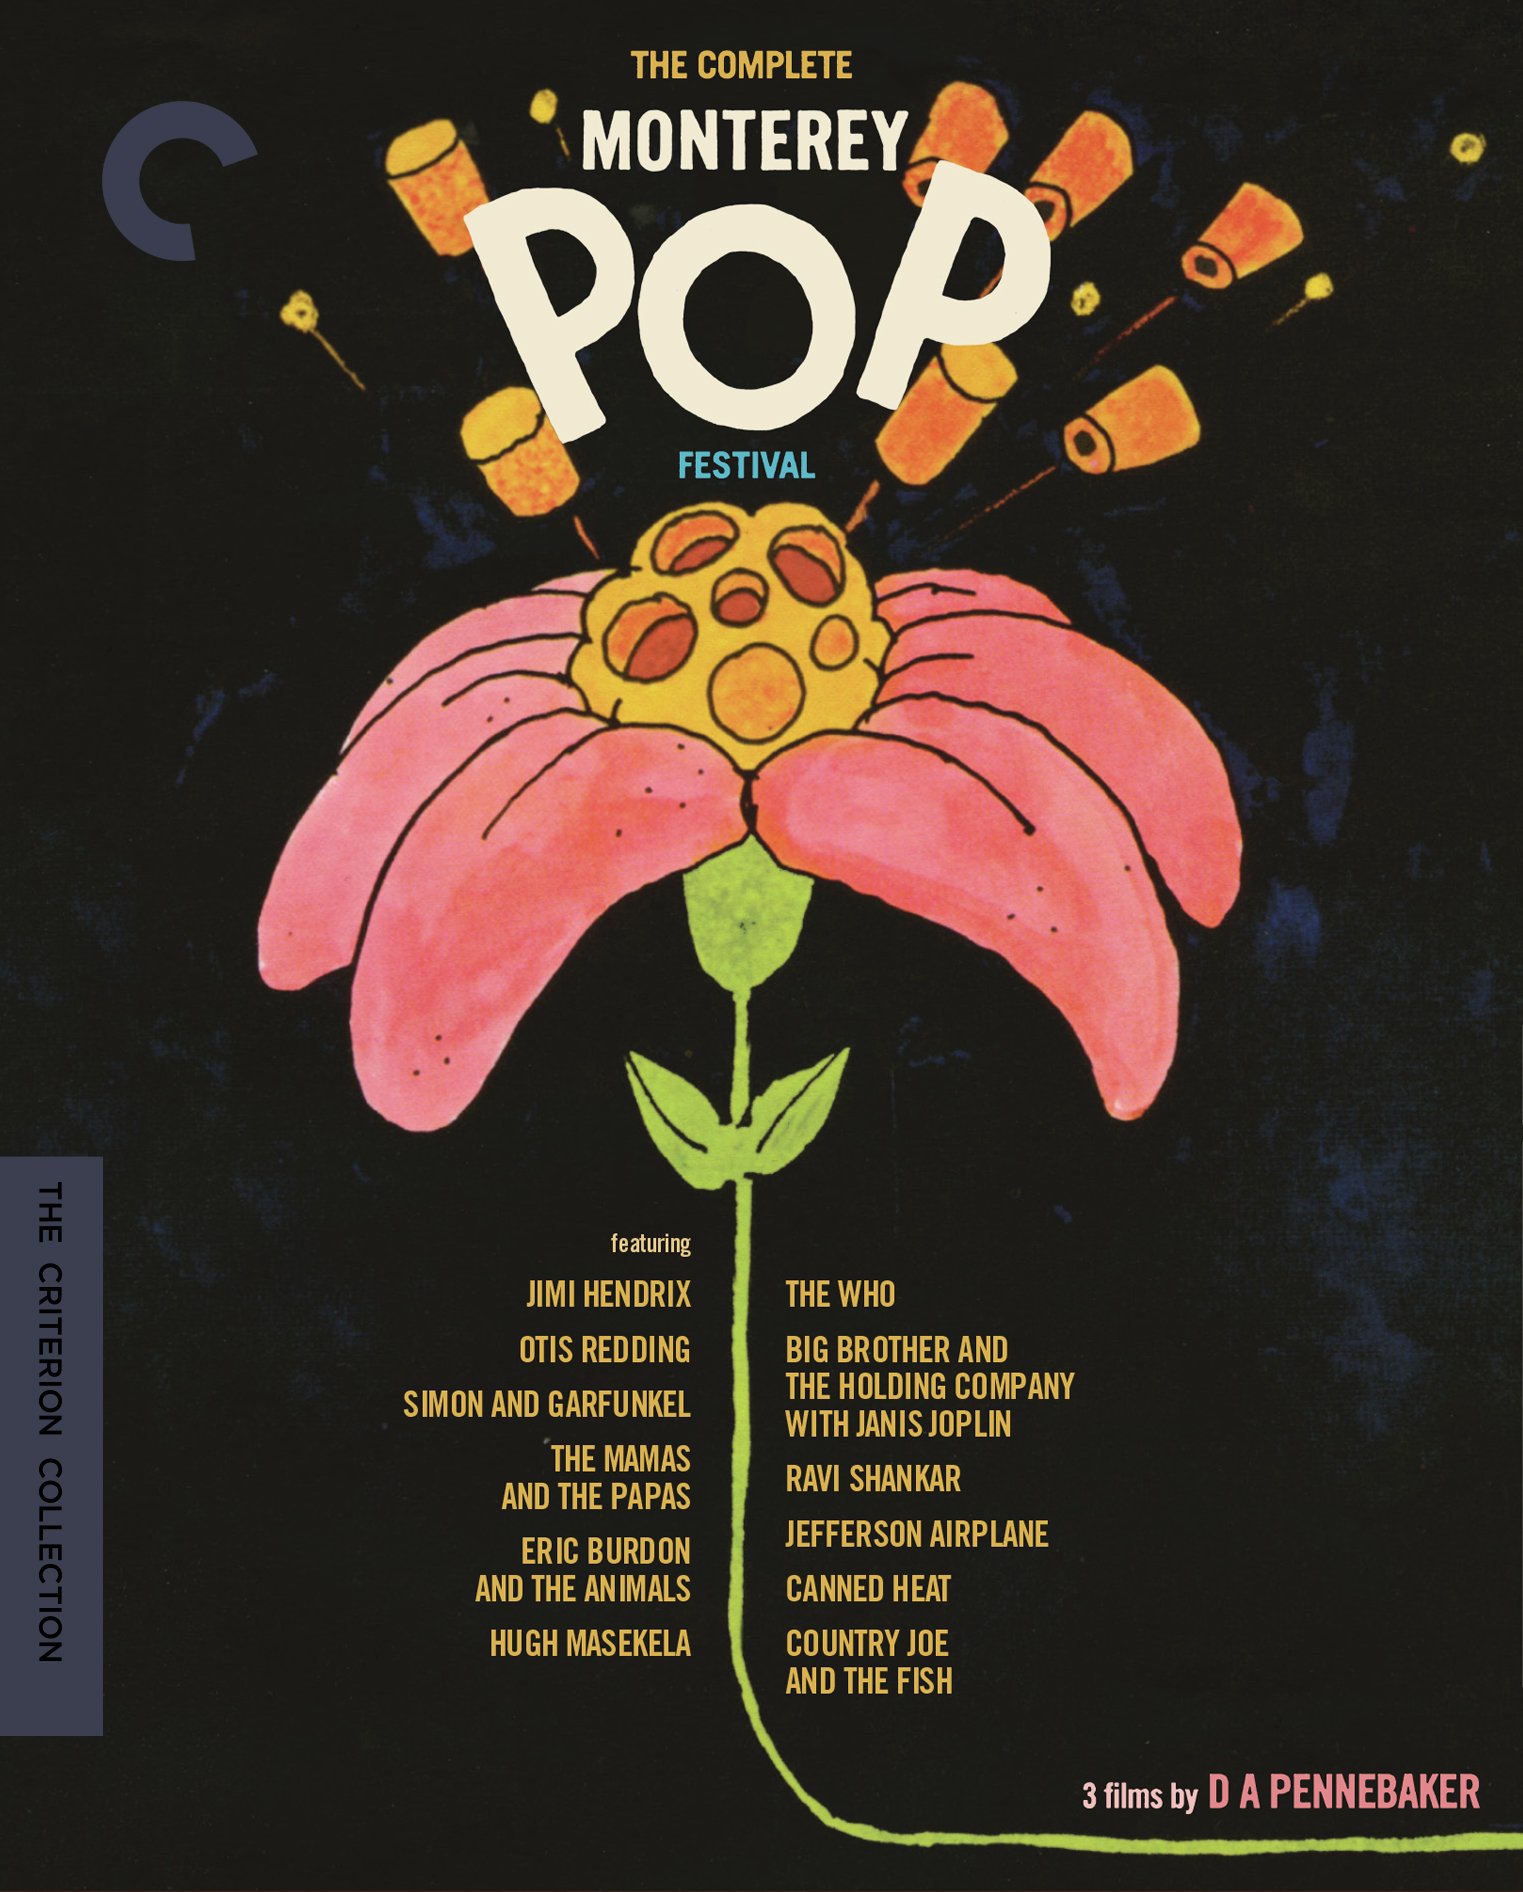 Complete Monterey Pop Festival (The Criterion Collection) 2017 [Blu-ray] Amazon,  Prime shipping $27.66